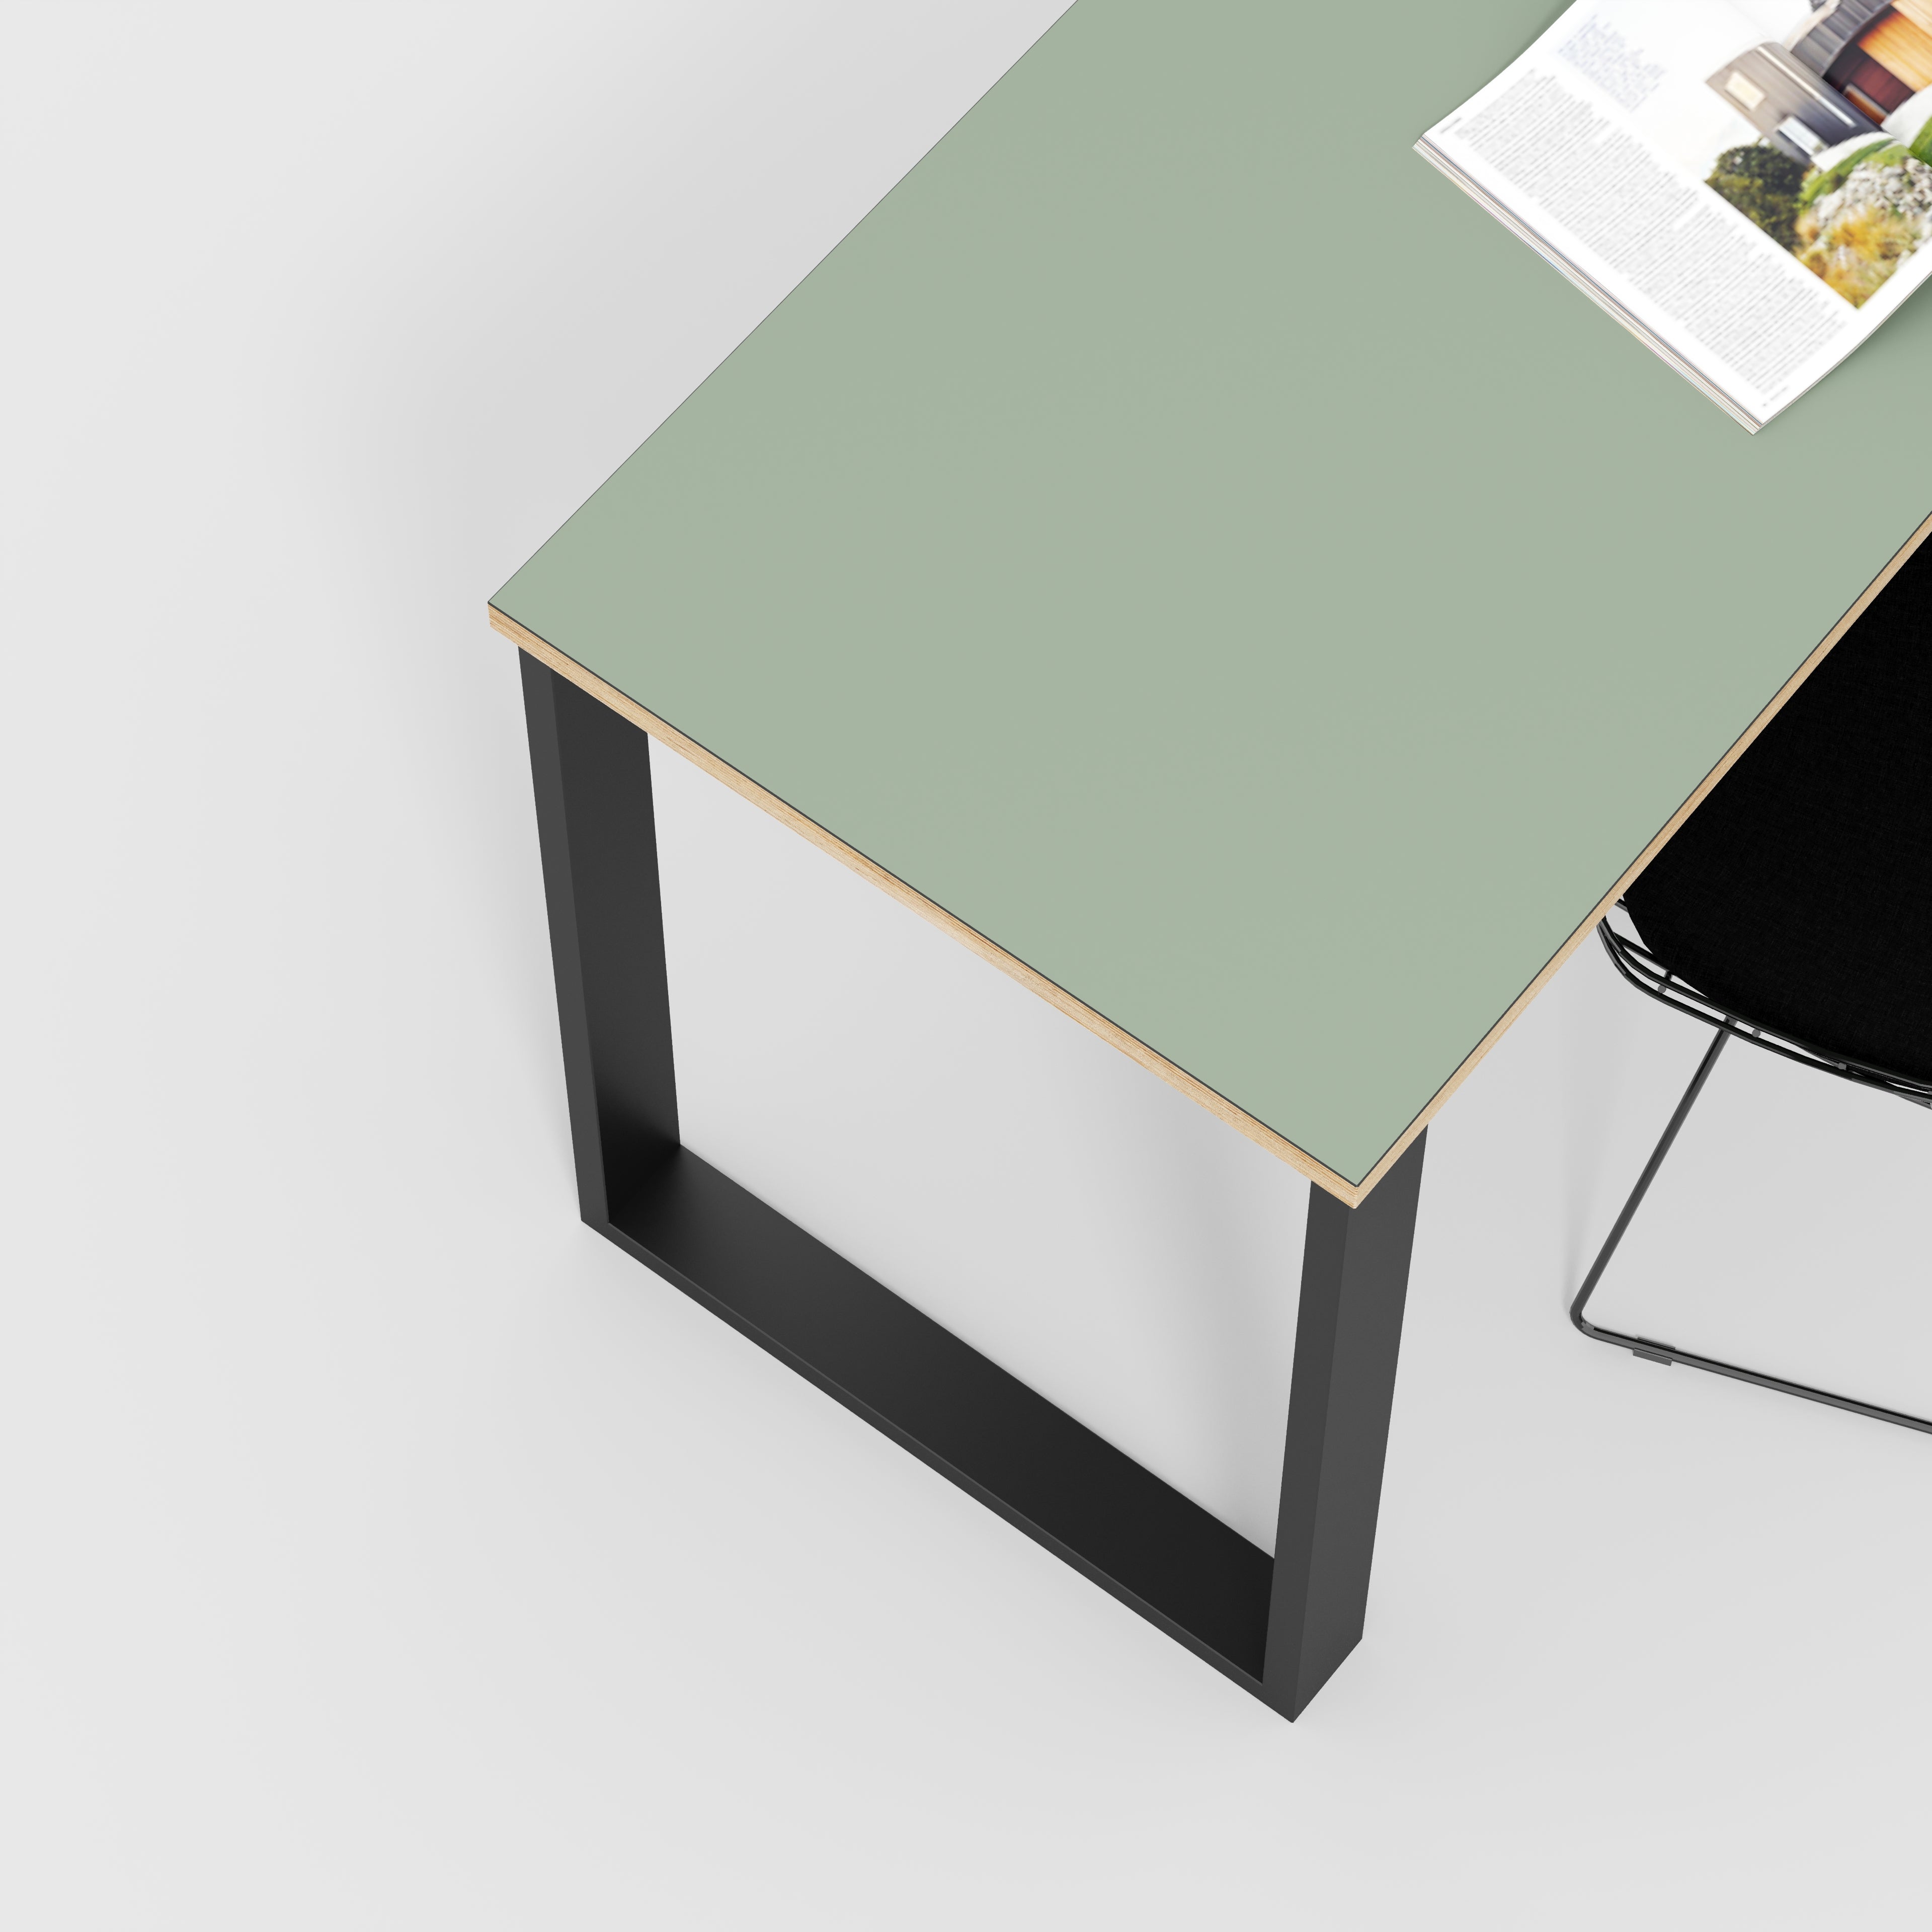 Desk with Black Industrial Legs - Formica Green Slate - 1200(w) x 600(d) x 735(h)